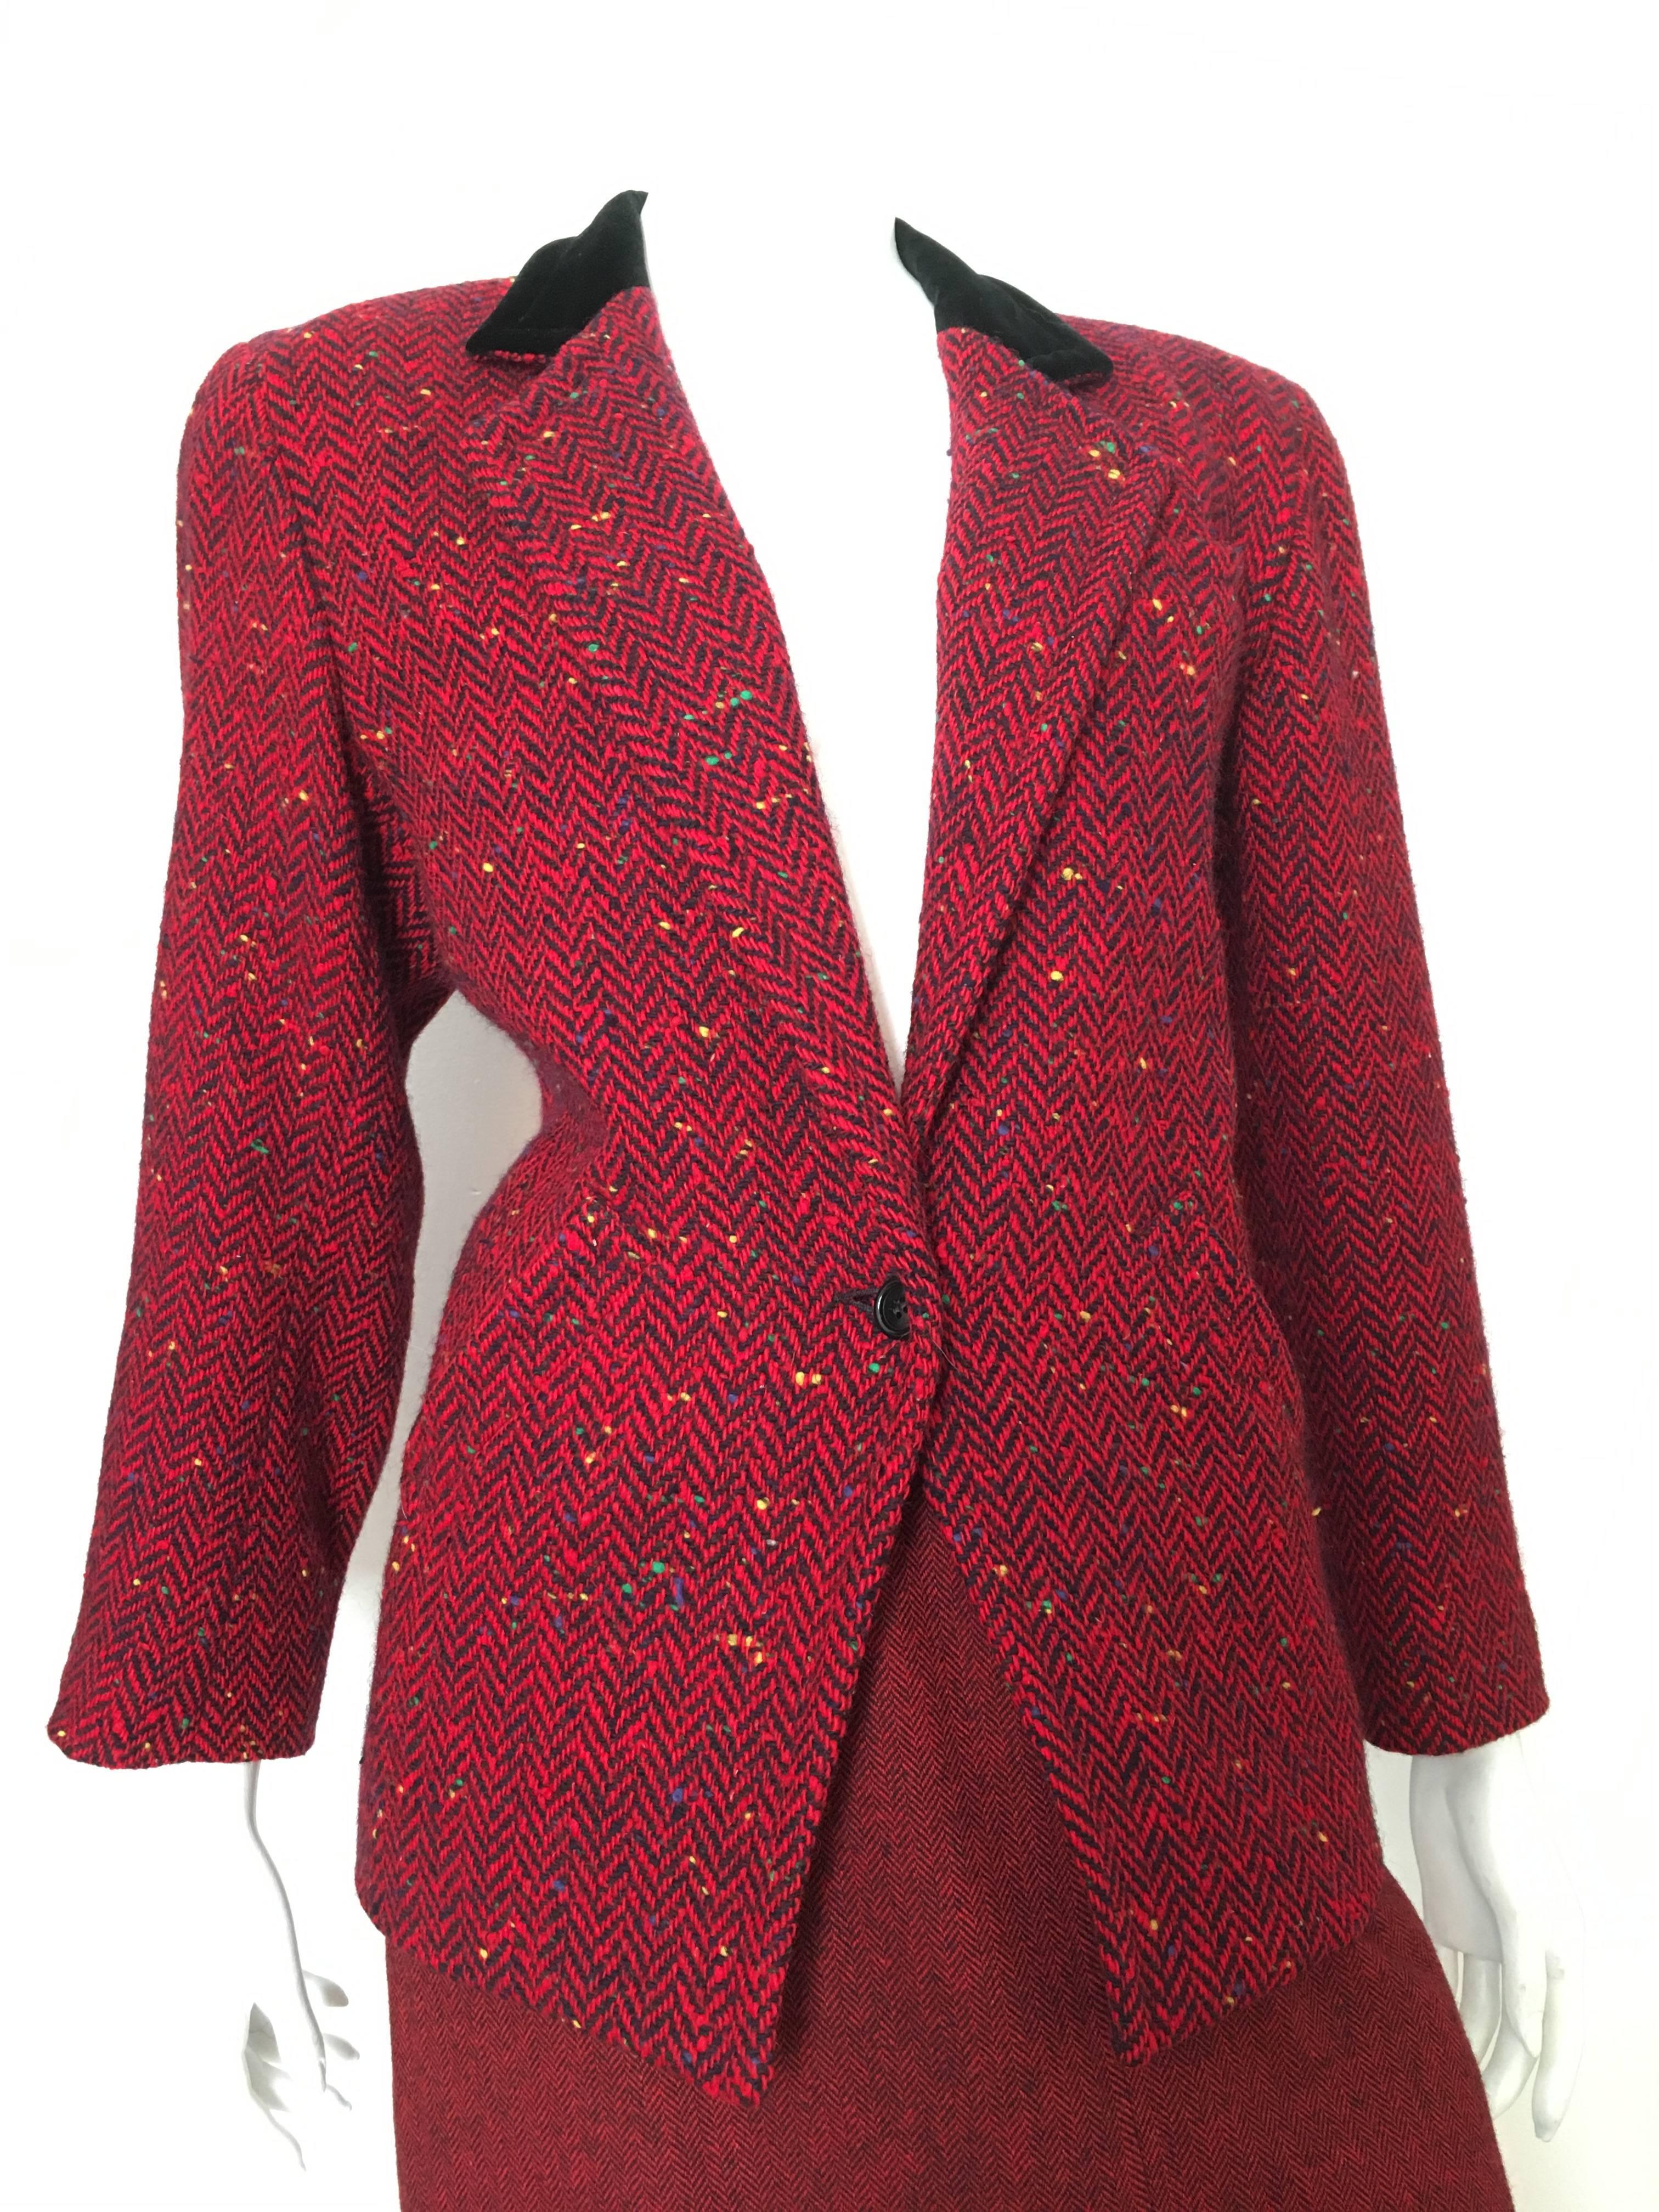 Guy Laroche Boutique Paris 1970s herringbone pattern red wool jacket & skirt suit set is a French size 36 and fits like an USA size size 6. Ladies please go grab your most trusted friend, Mr. Tape Measure, and measure your bust, waist, hips